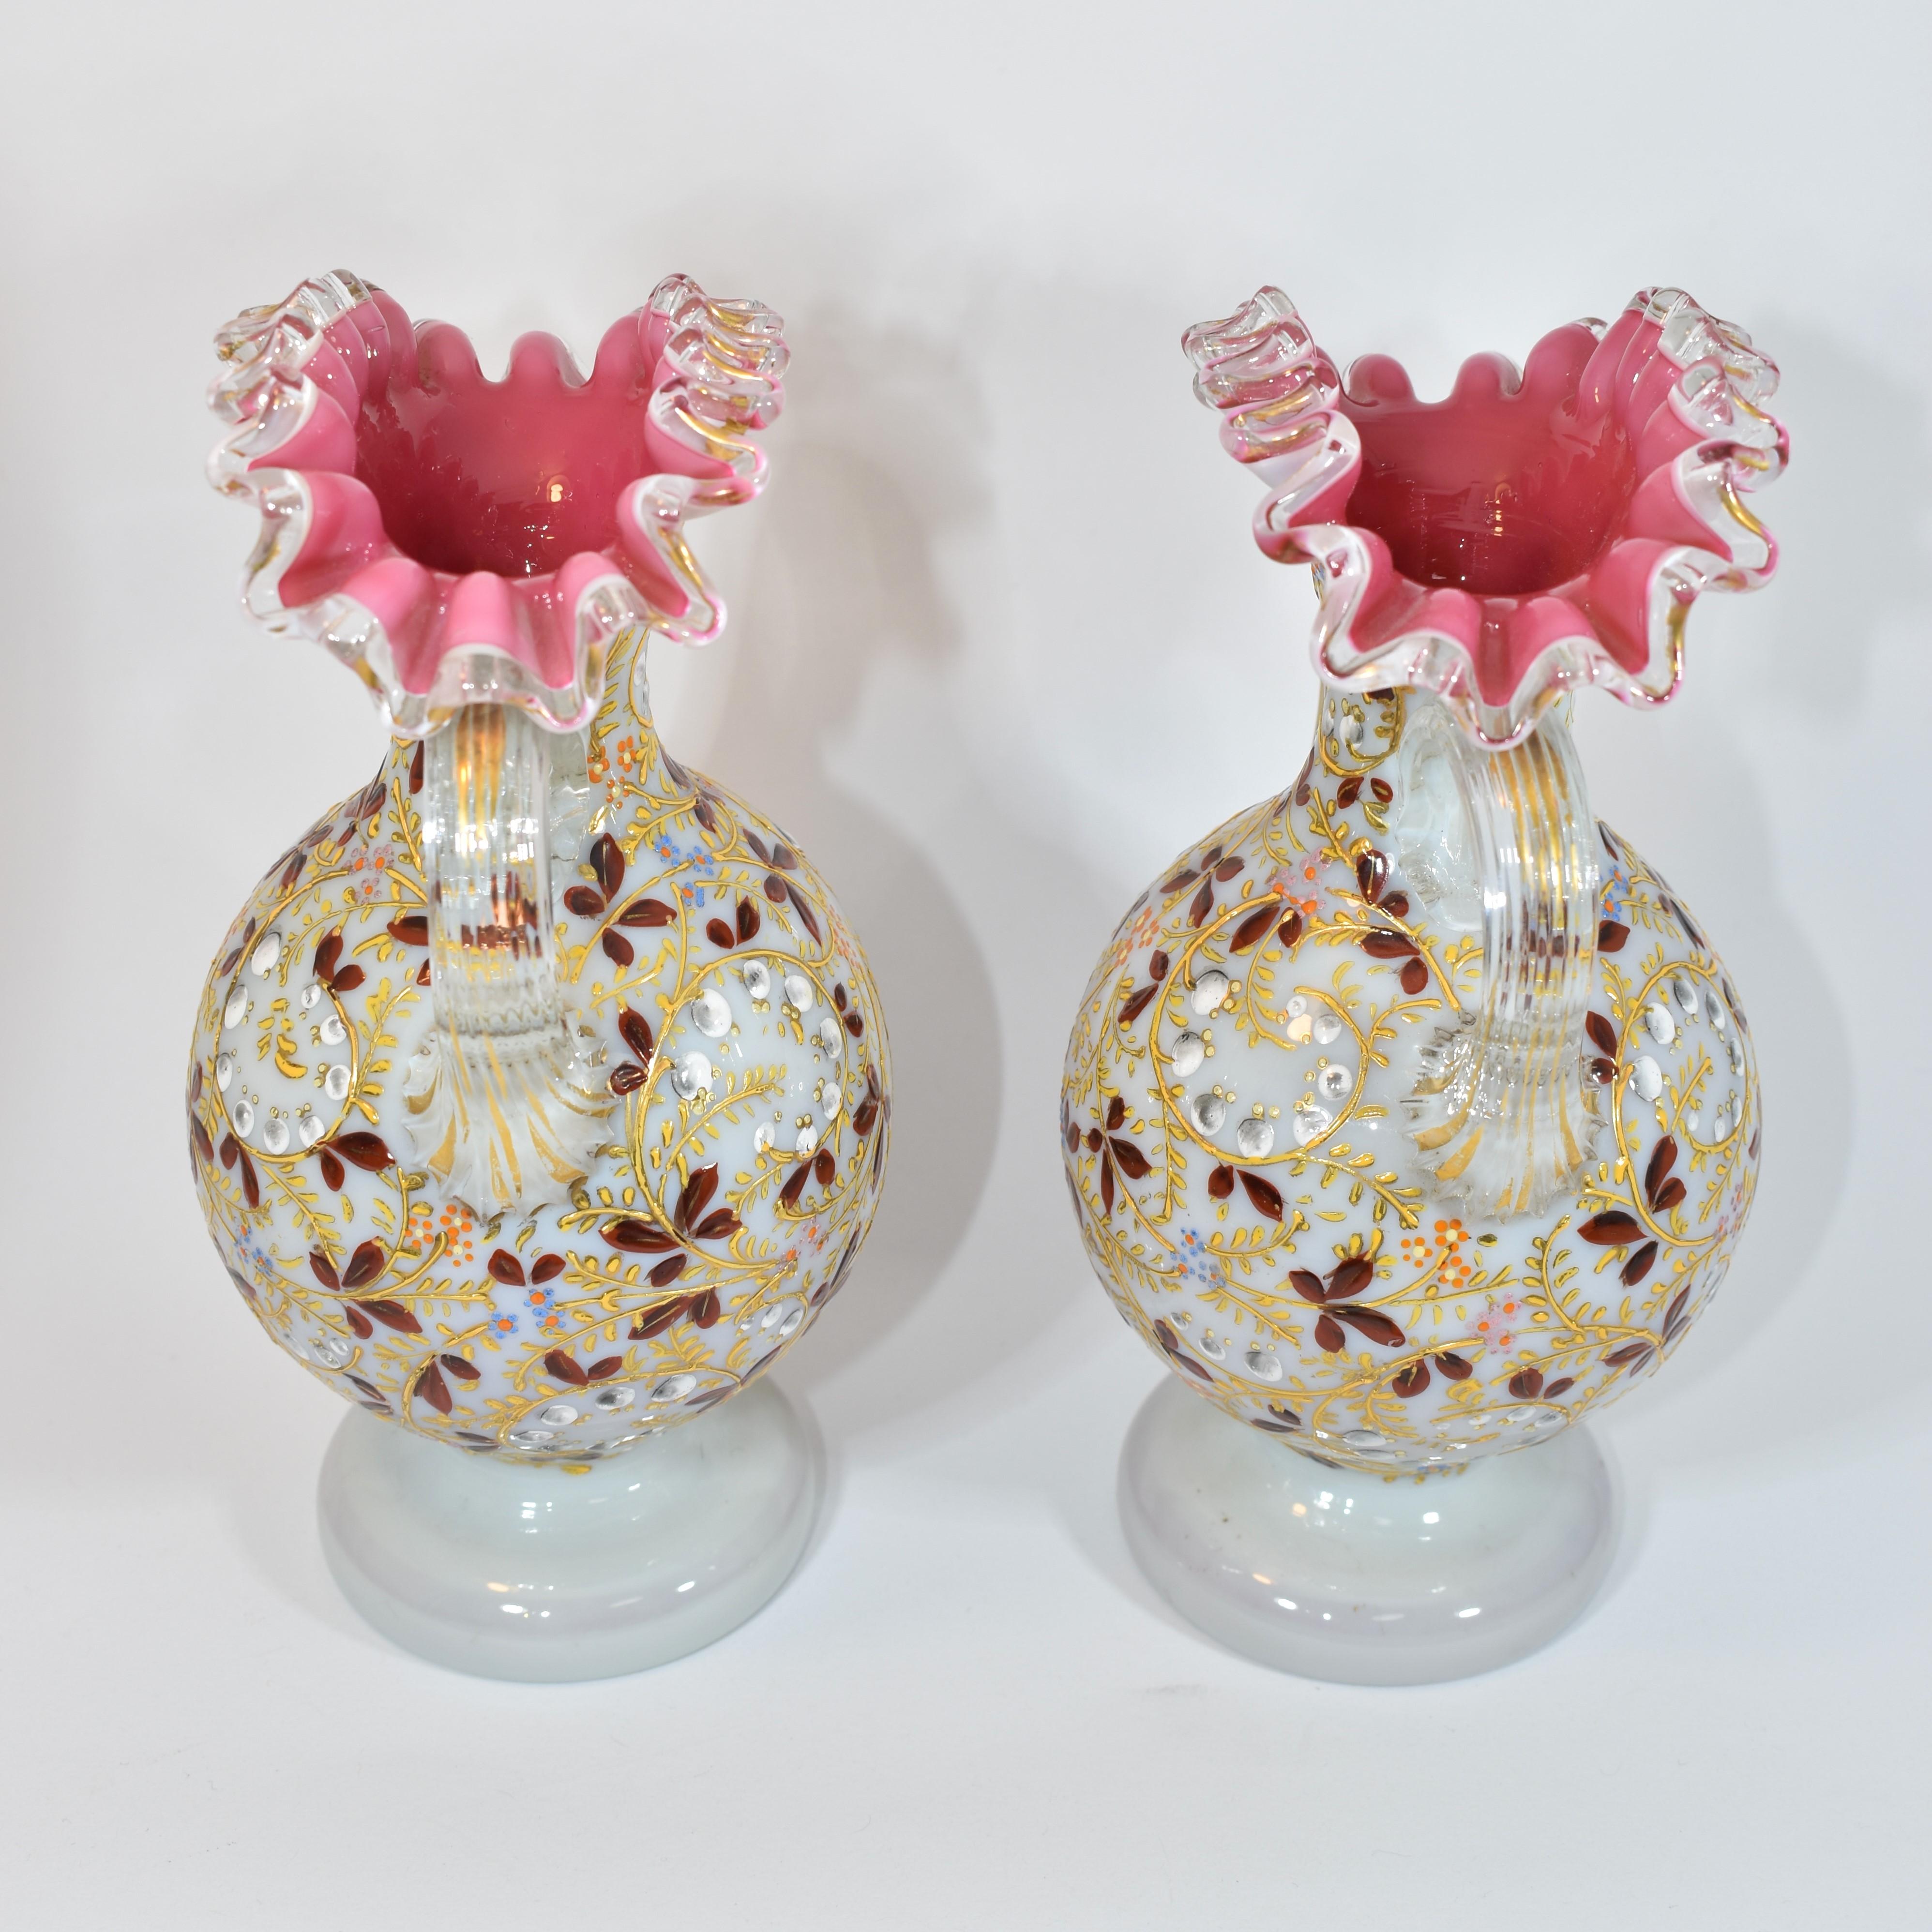 Enameled Antique Pair of Opaline Overlay Enamelled Glass Vases, Moser, 19th Century For Sale